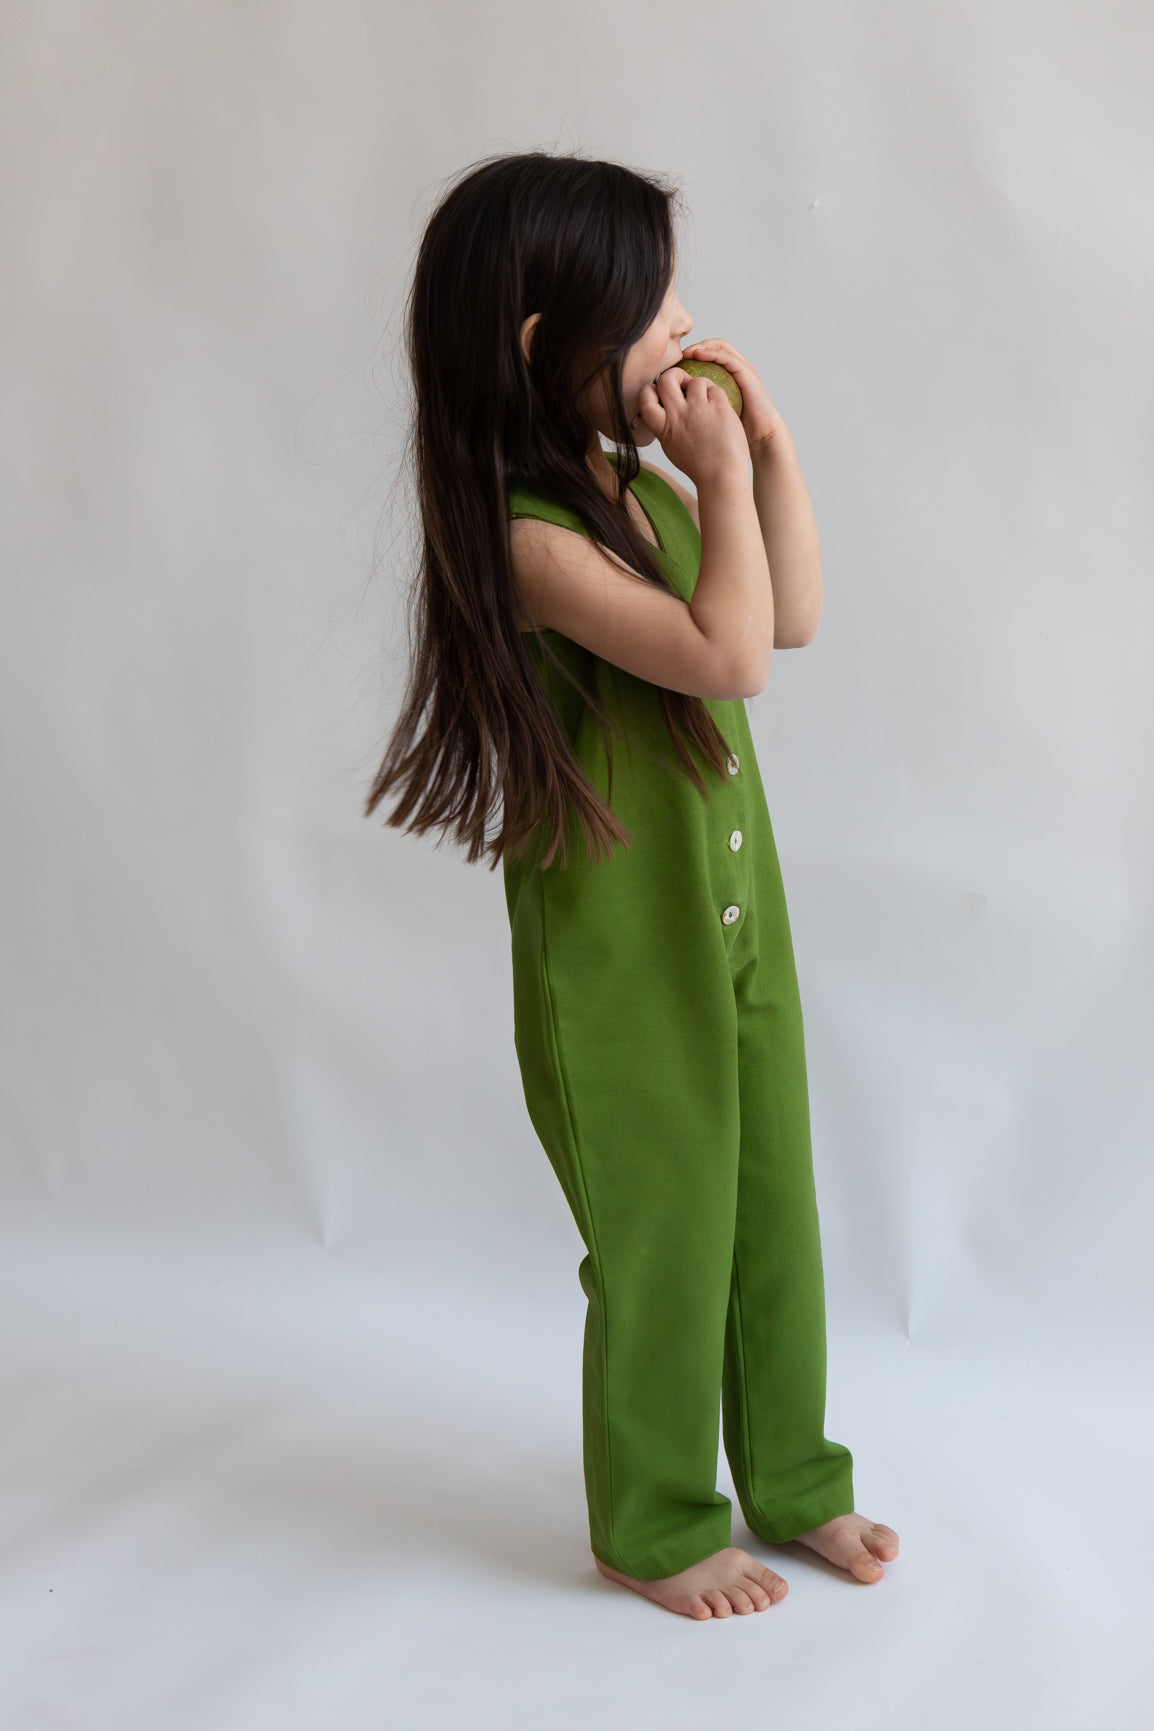 Green pear color Kids Mini Jumpsuit overall workwear cotton canvas with pockets 5 buttons v-neck OEKO-TEX sustainable clothes handmade